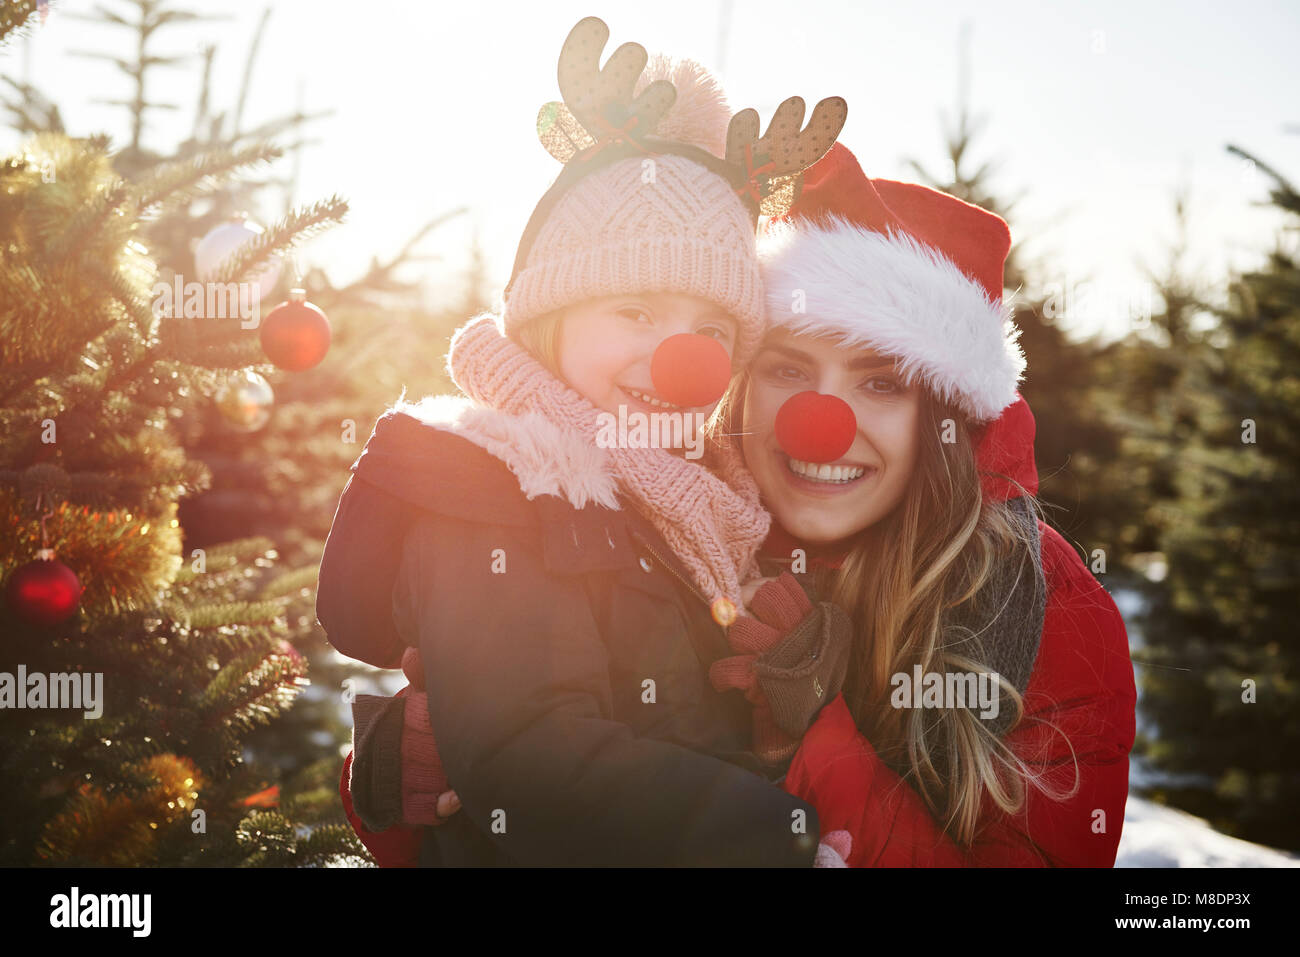 Girl and mother in christmas tree forest with red noses, portrait Stock Photo